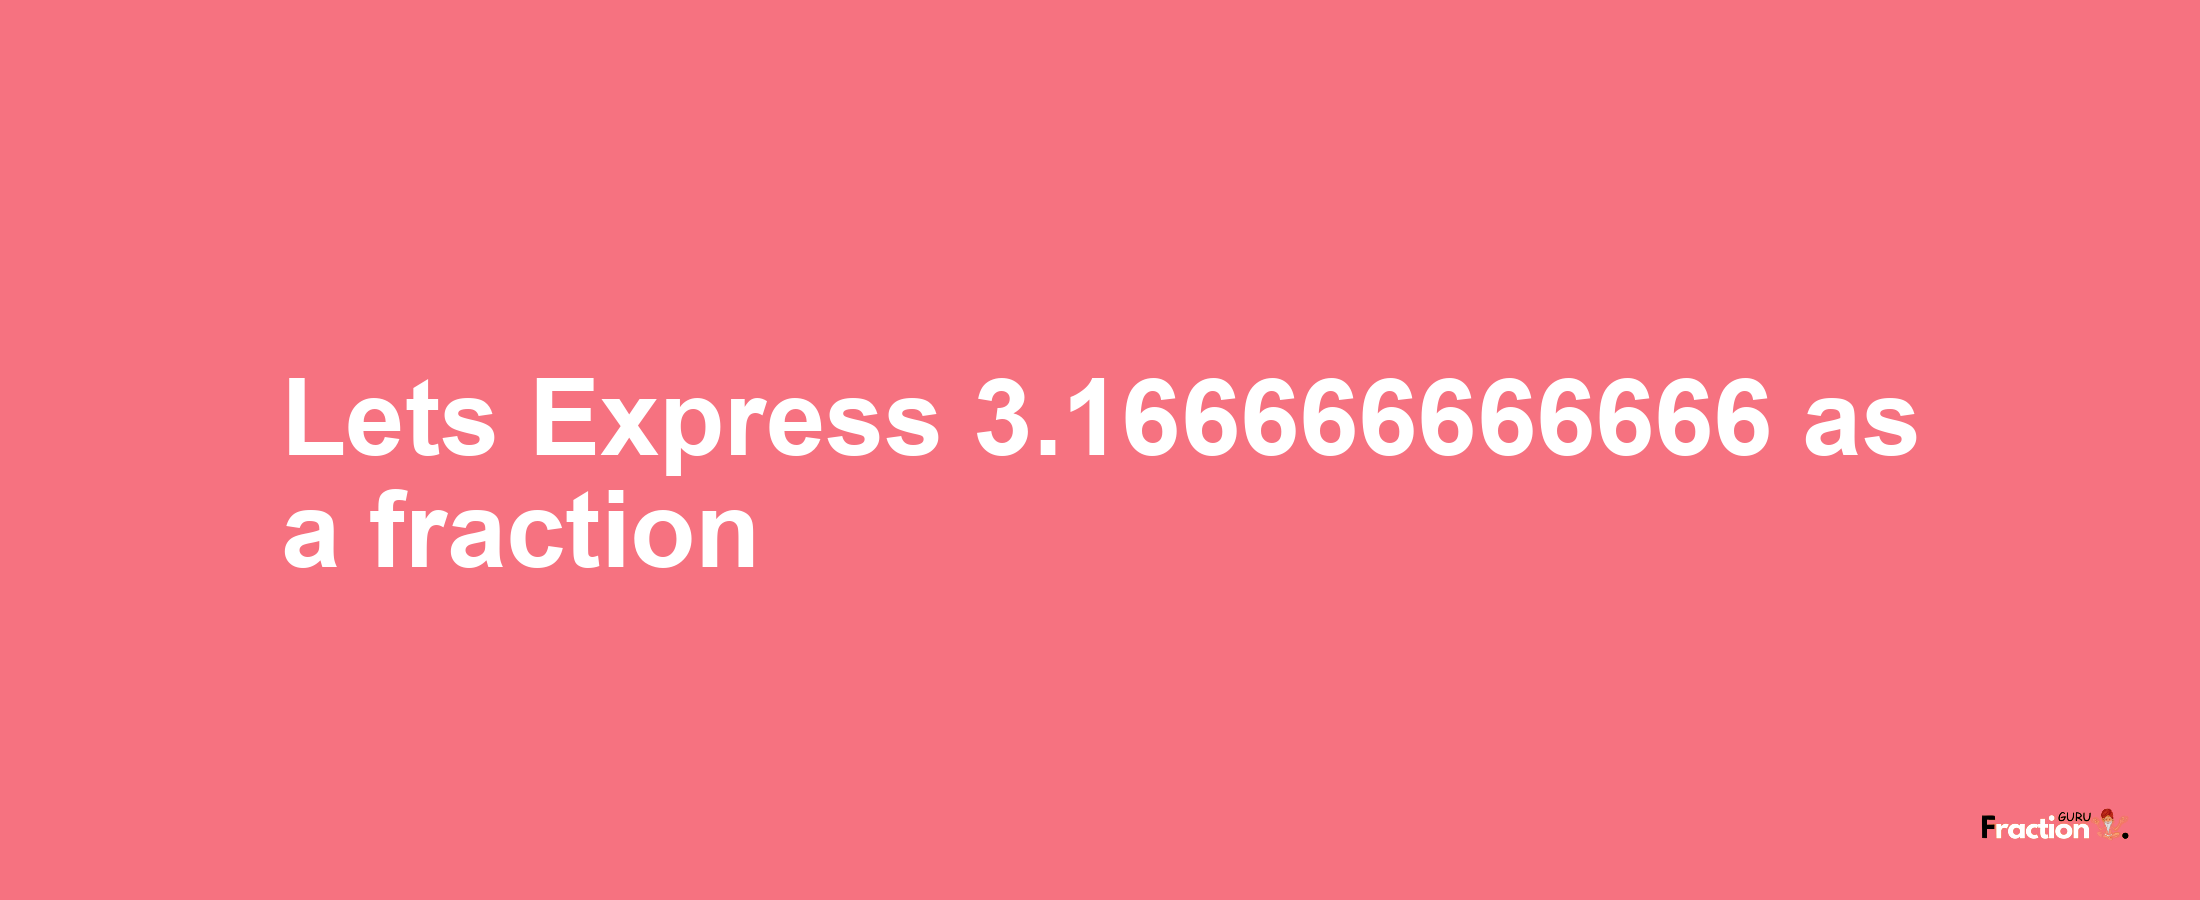 Lets Express 3.166666666666 as afraction